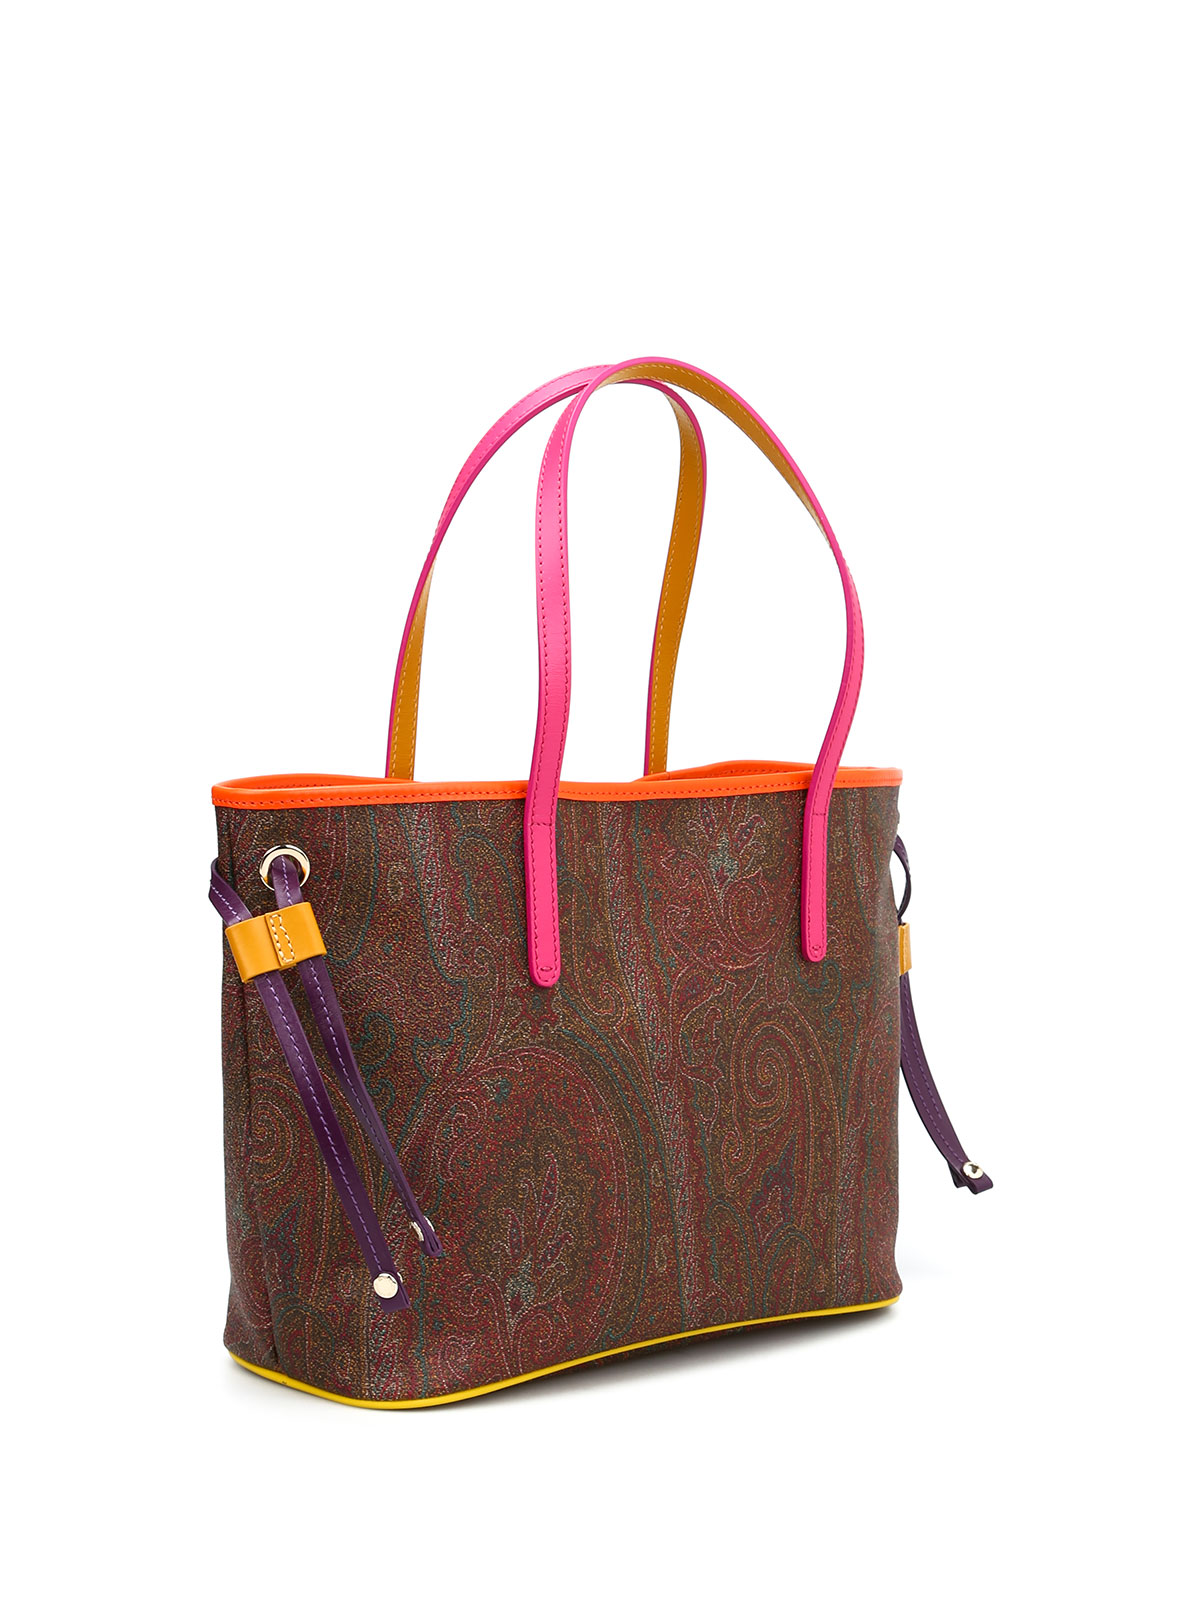 ETRO BAGS Bag with Pattern